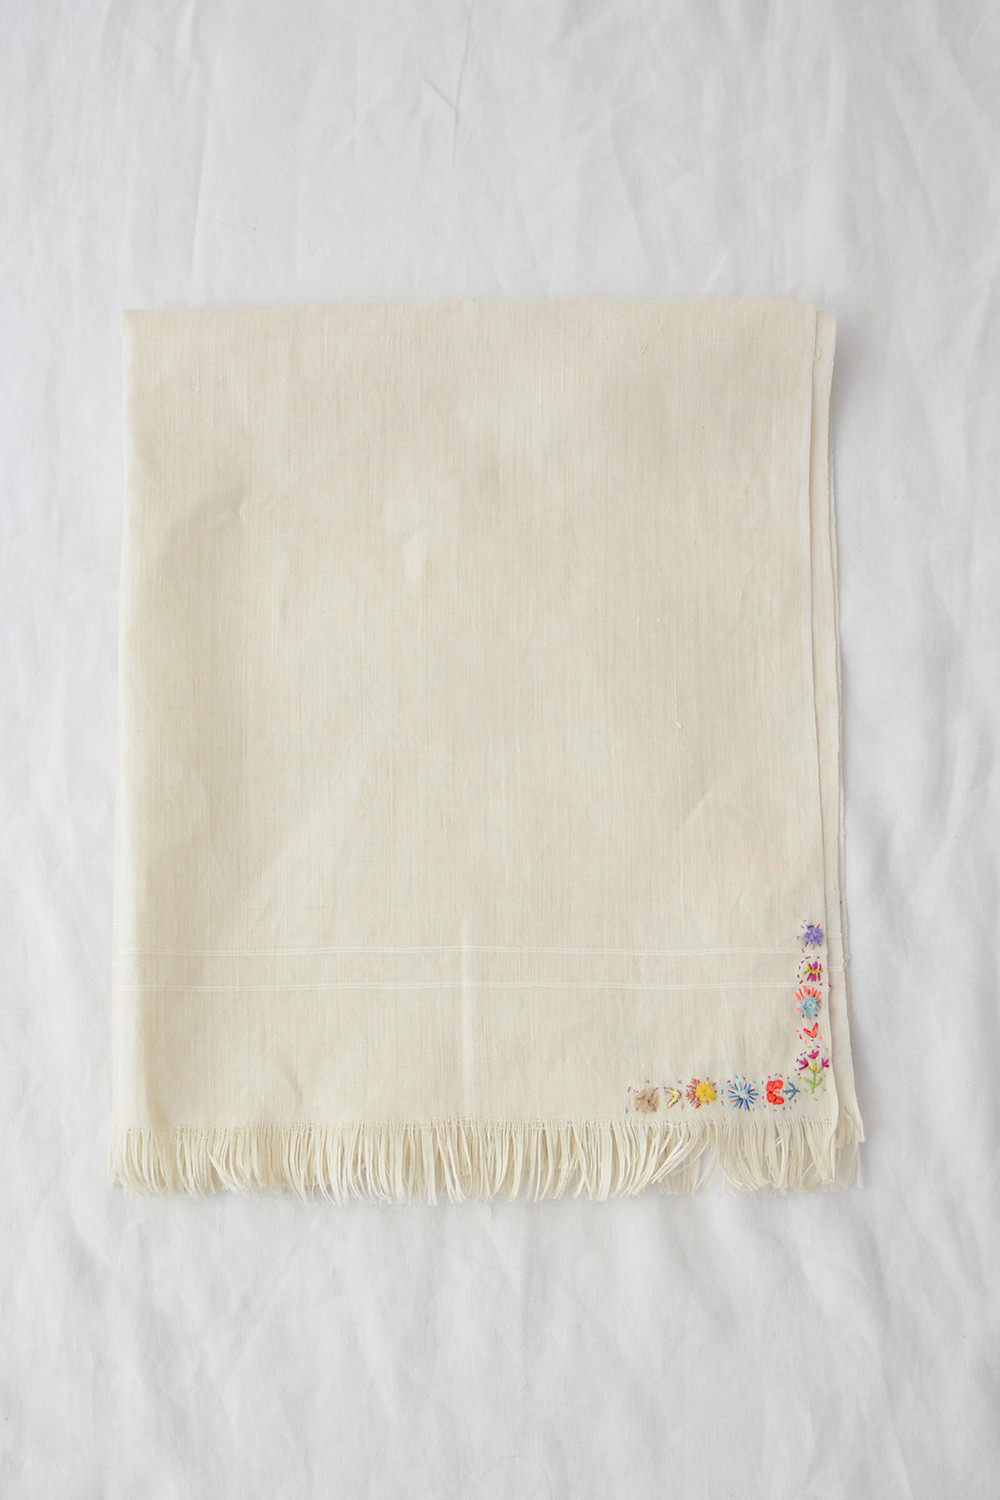 antonia rossi embroidered napkins top picture